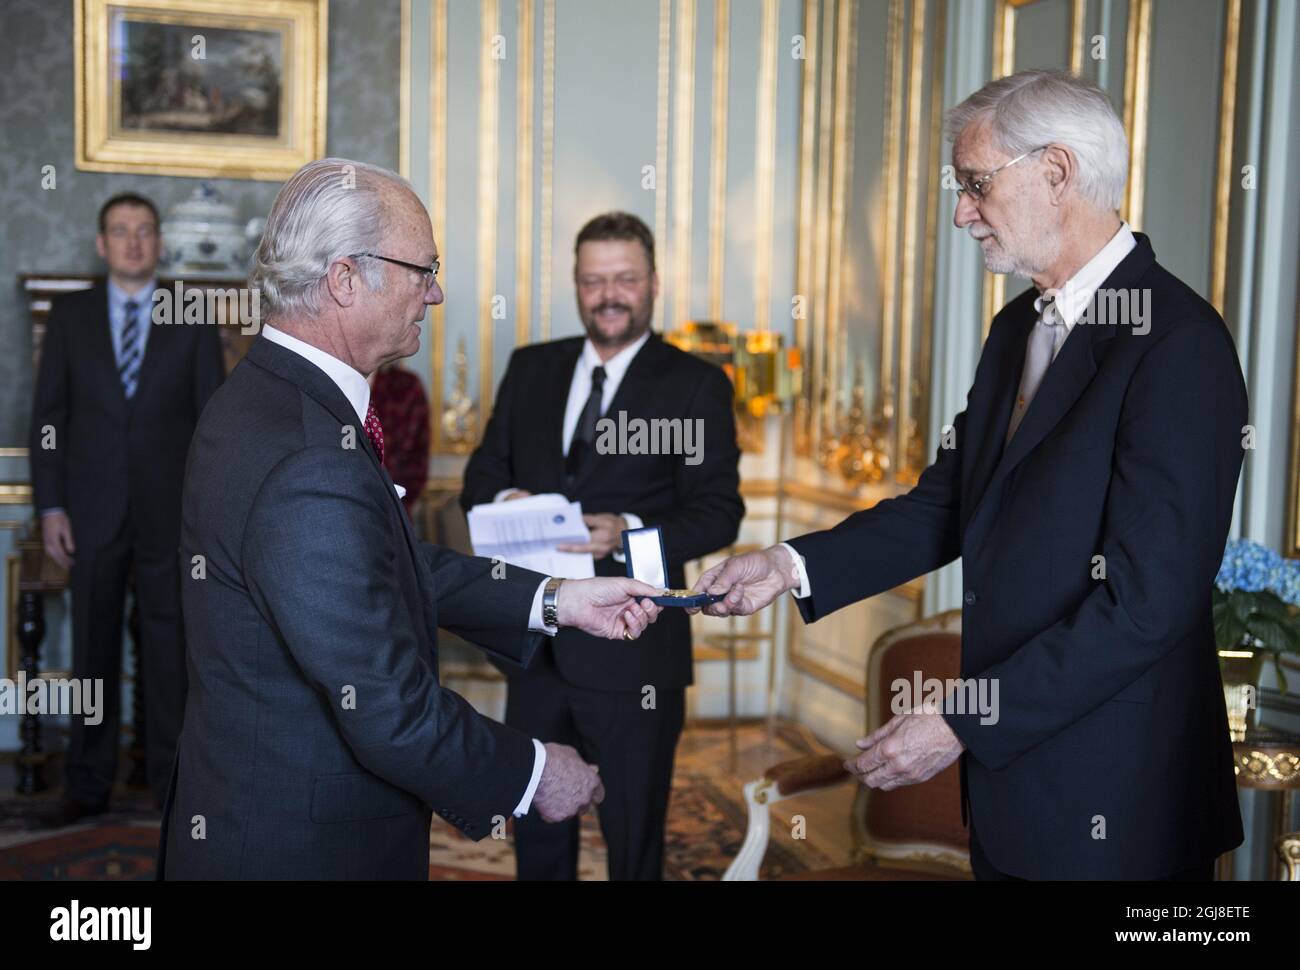 STOCKHOLM 20140414 King Carl XVI Gustaf is seen together with Professor Compton James Tucker of NASA and Professor Gudrun Gisladotti of the University of Iceland during a medal ceremony at the Royal Palace of Sweden, April 14, 2014. Professor Tucker received the Vega medal, a Swedish award to individuals who 'excellently promoted the geographical research'. Professor Gisladottir received the Wahlberg's gold medal for her broad and deep knowledge in the 'land degradation and desertification,Â” The medals are awarded by the Swedish Society for Anthropology and Geography. Foto: Pontus Lundahl /  Stock Photo